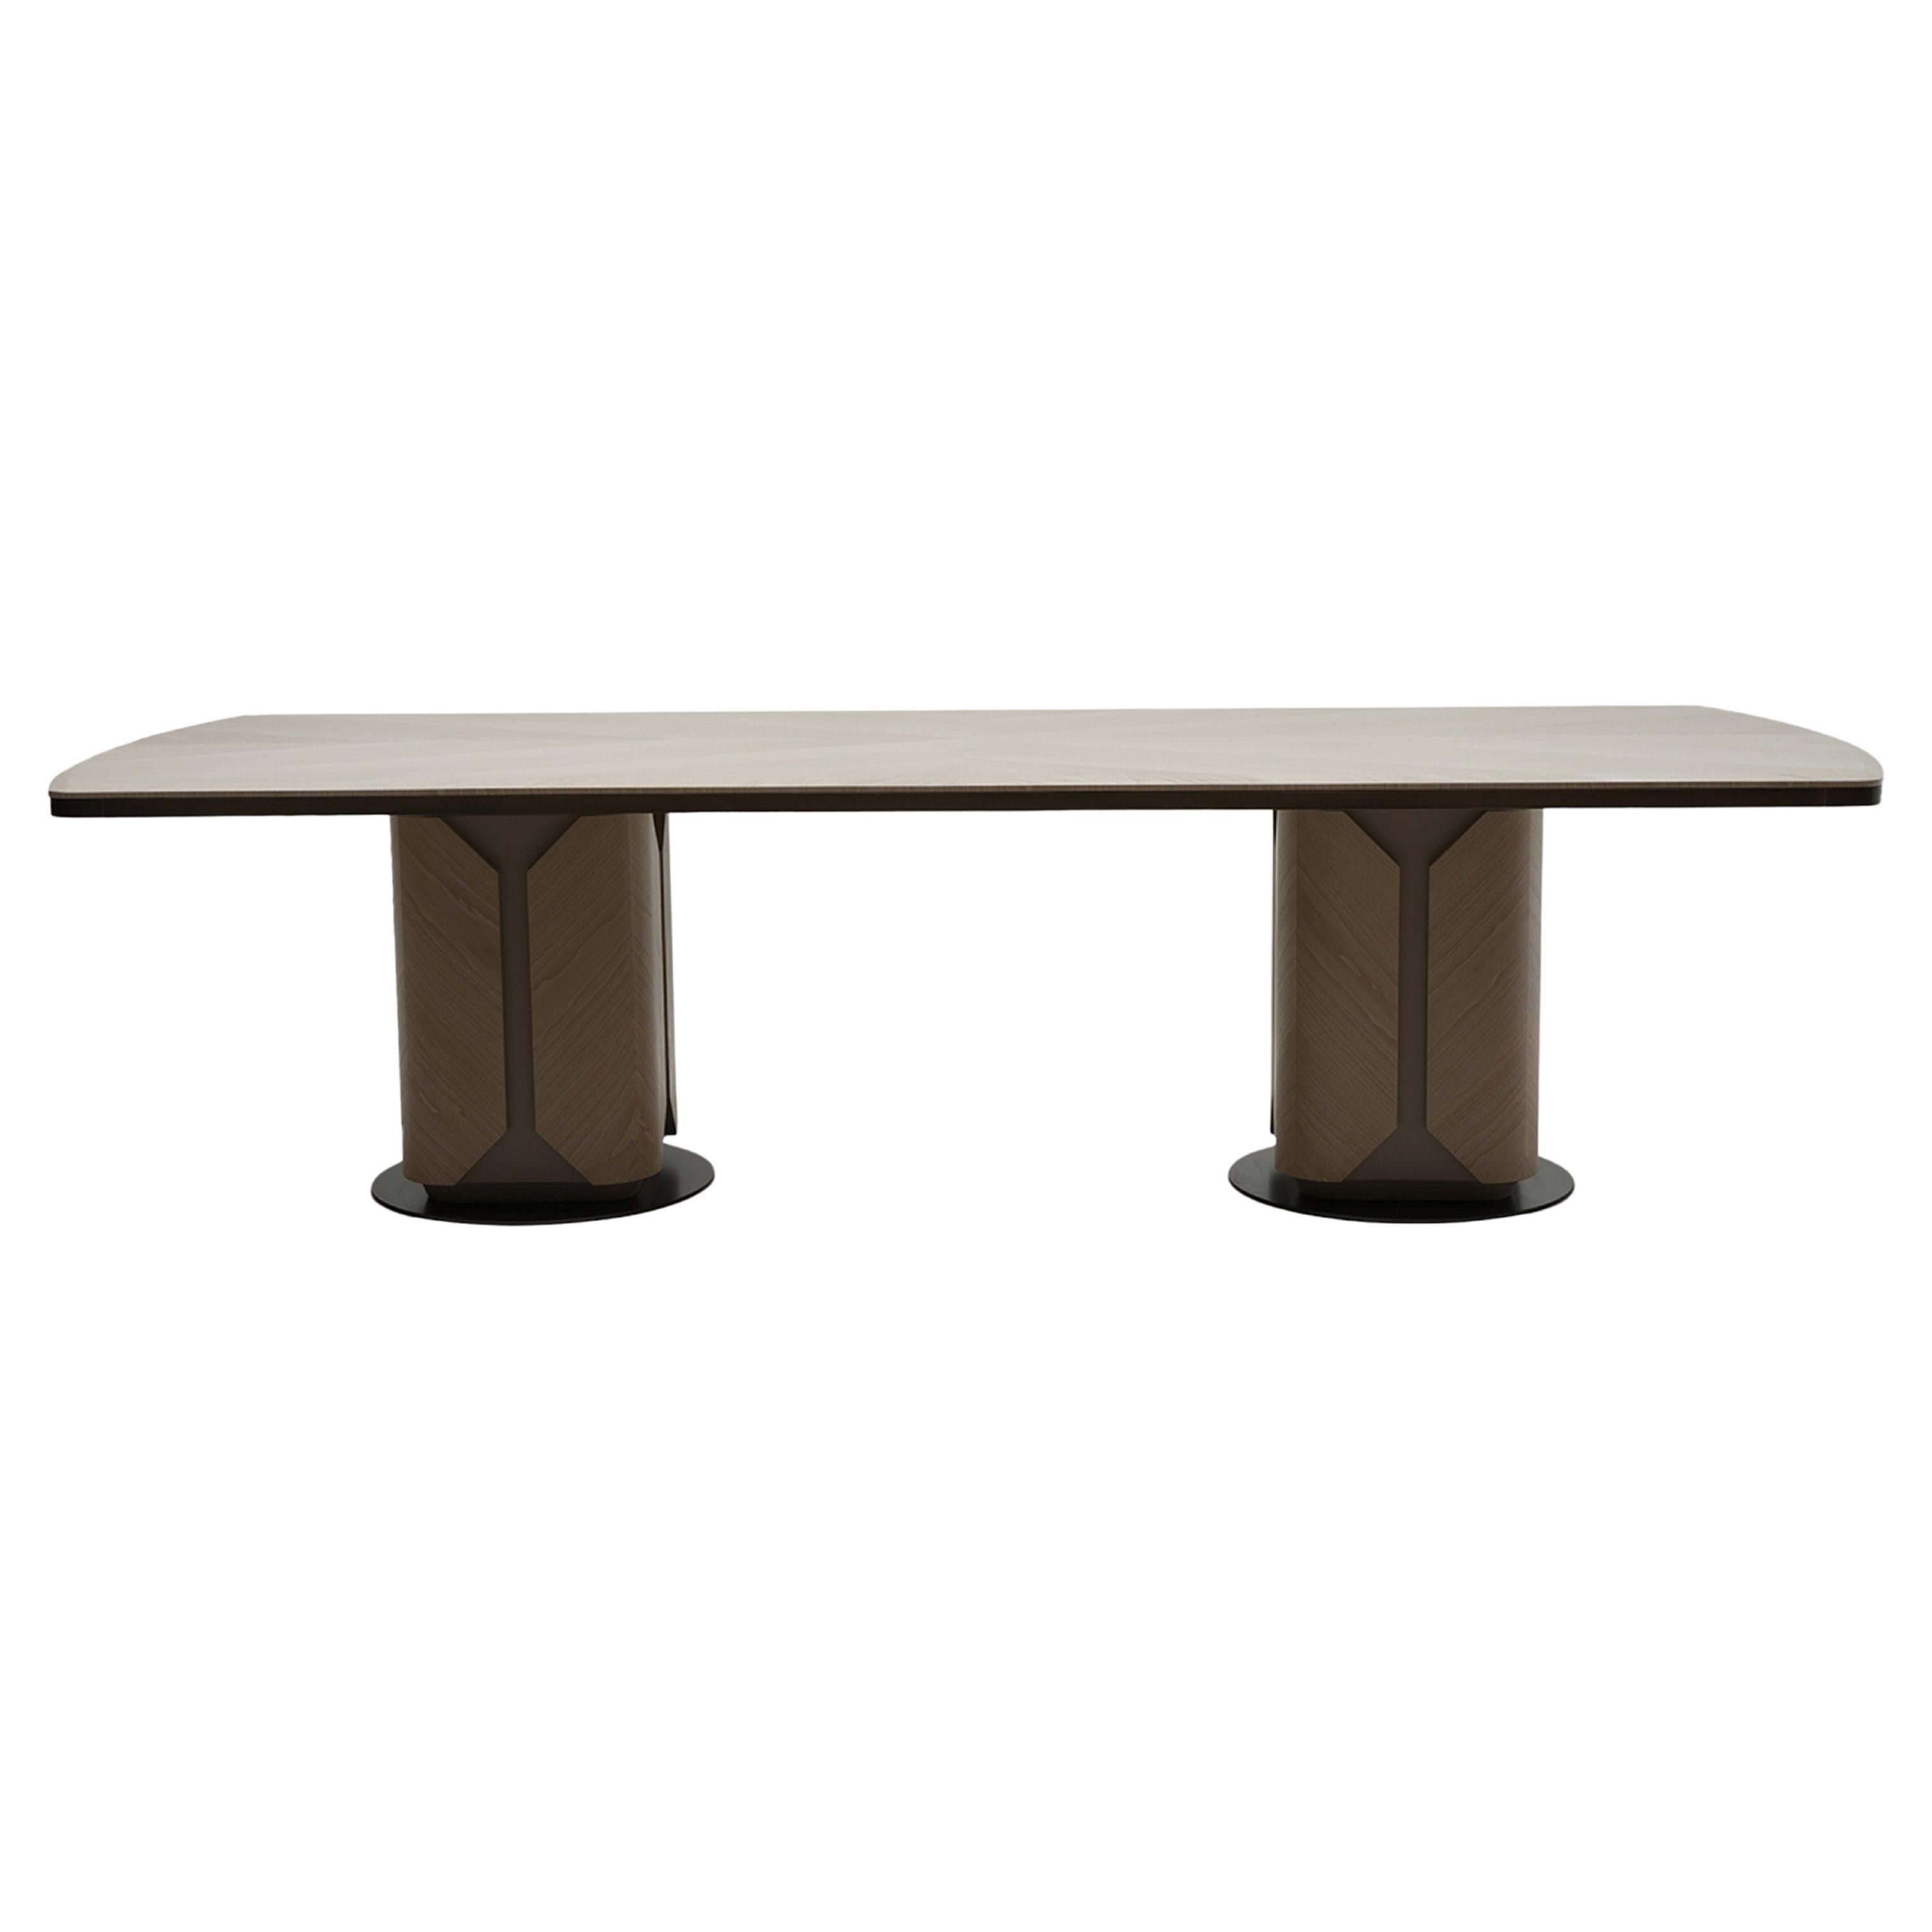 Altobasso Round Blue Dining Table Cafedesart